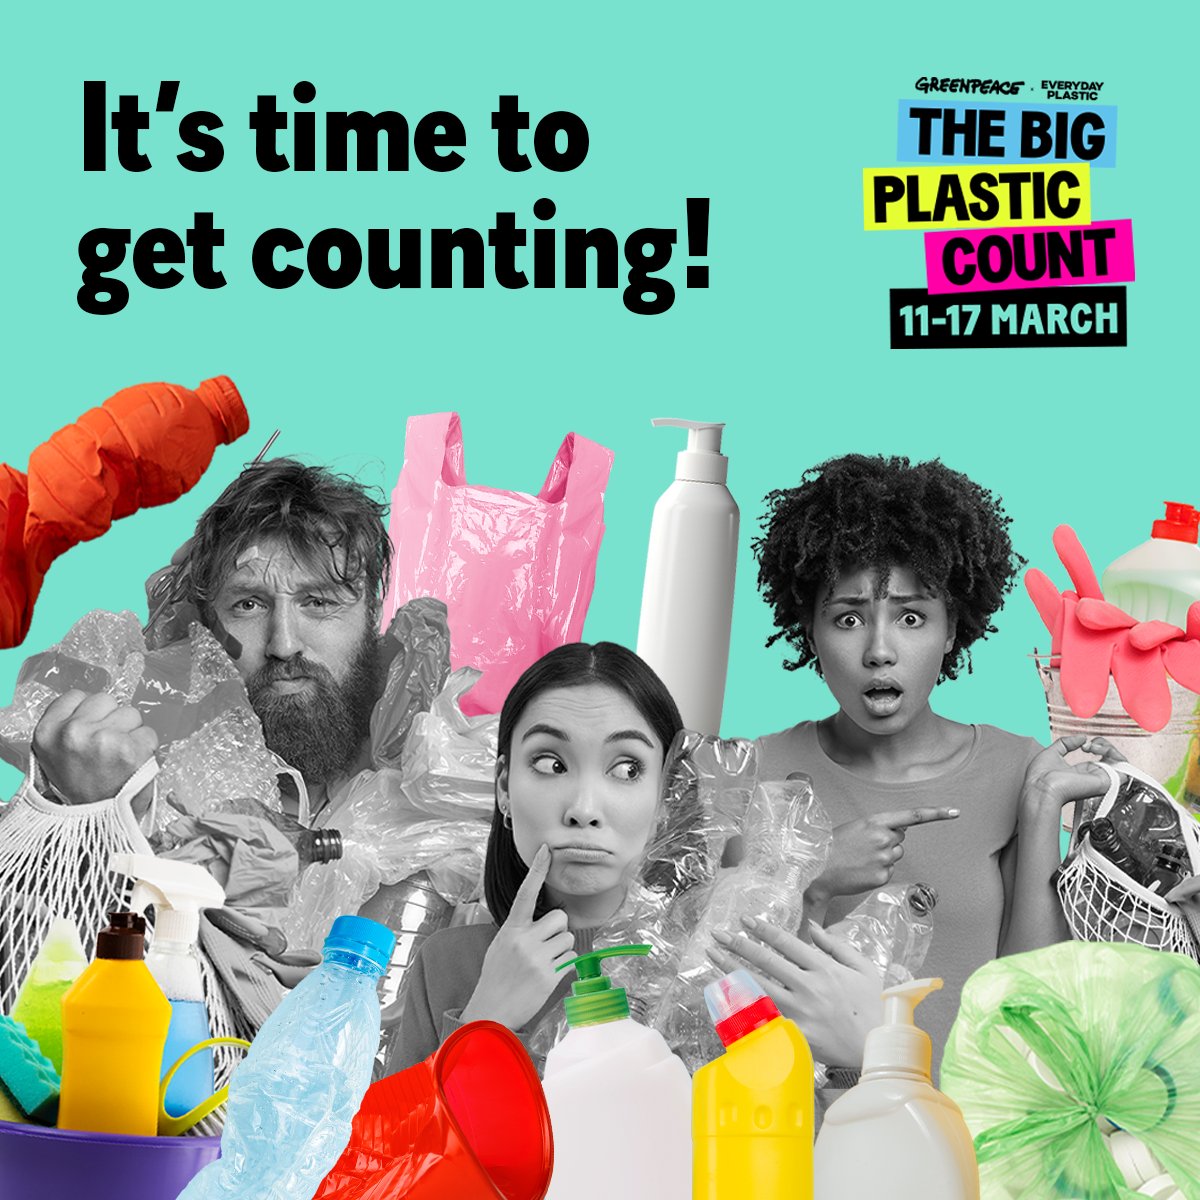 Are you taking part in the Big Plastic Count? We are! @VisitKnowle @visit_solihull @ARochaUK #EcoChurch @Greenanglicans @GreenChristian_ #Knowle @churchofengland thebigplasticcount.com/community